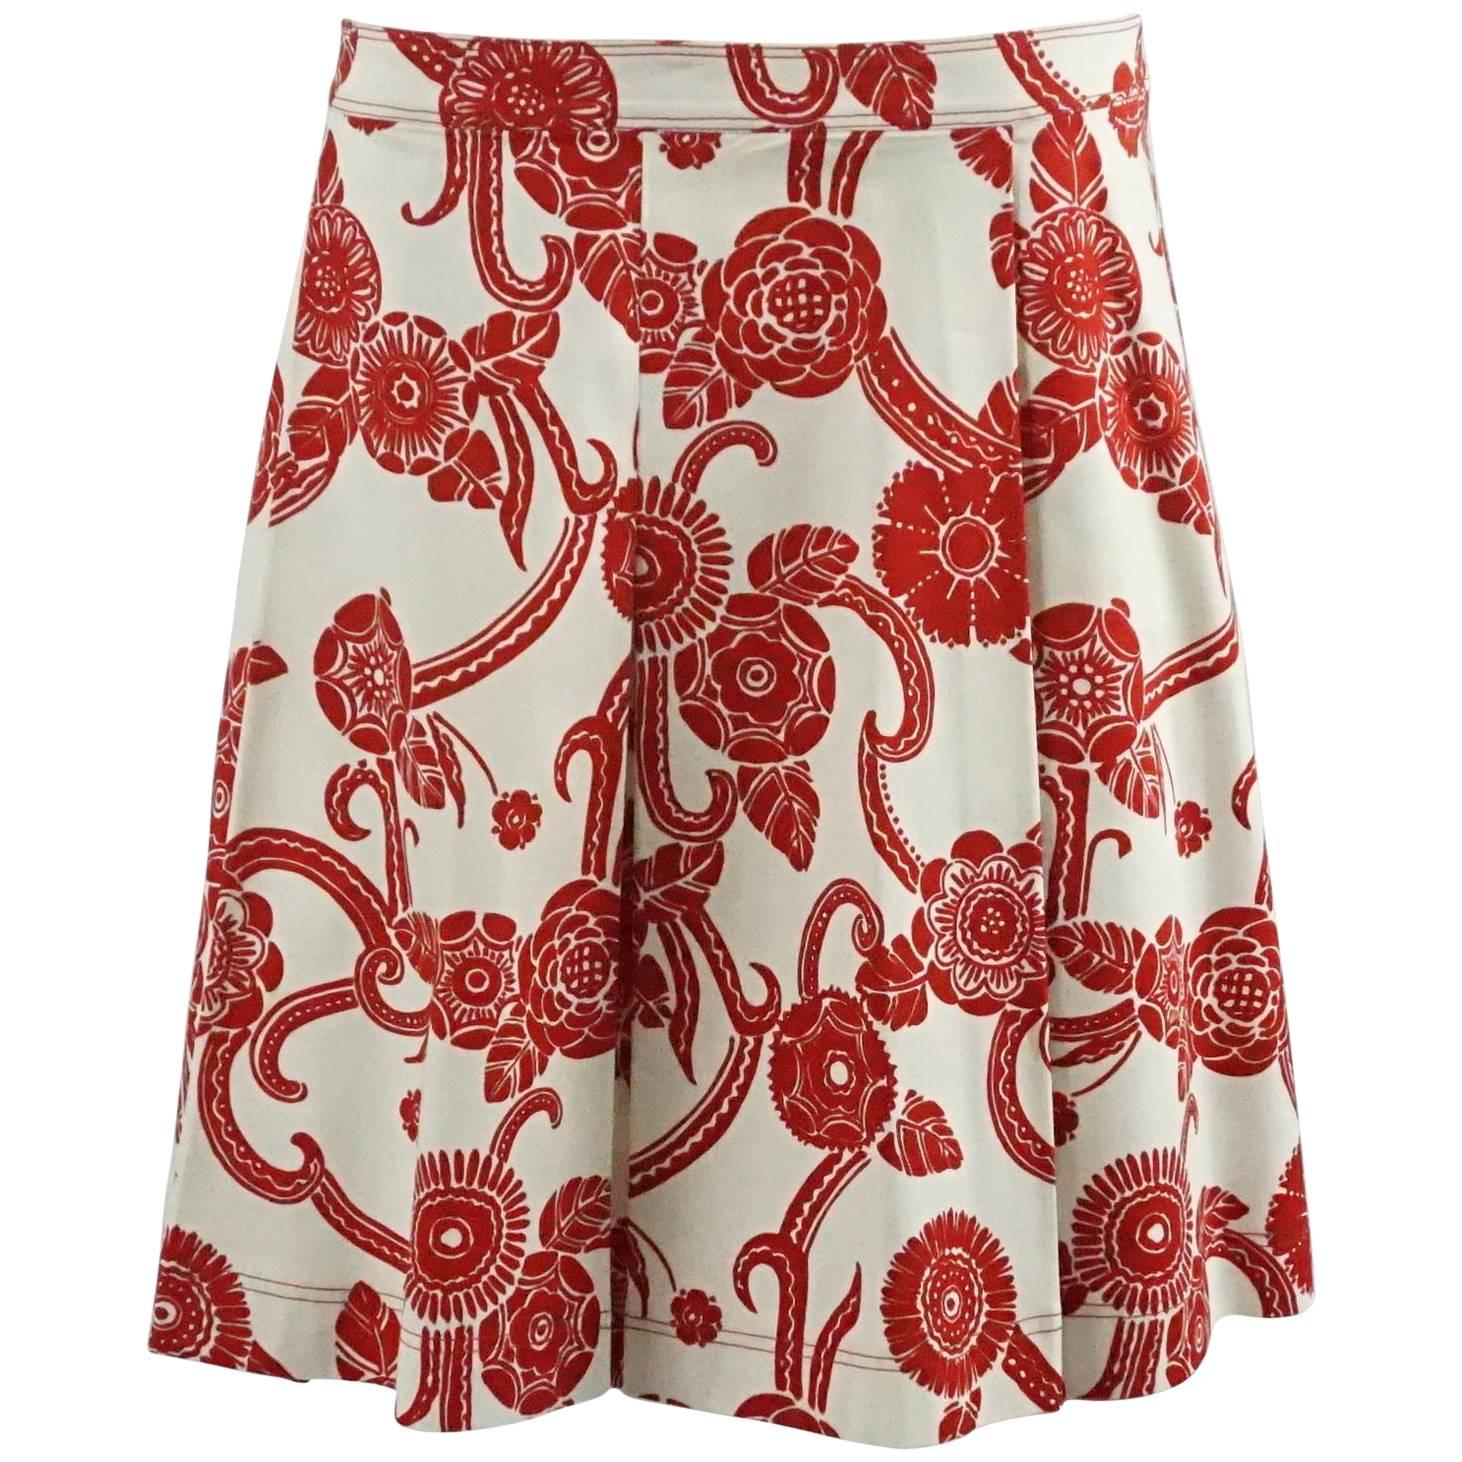 Oscar de la Renta Red and White Floral Cotton Pleated Skirt - 10